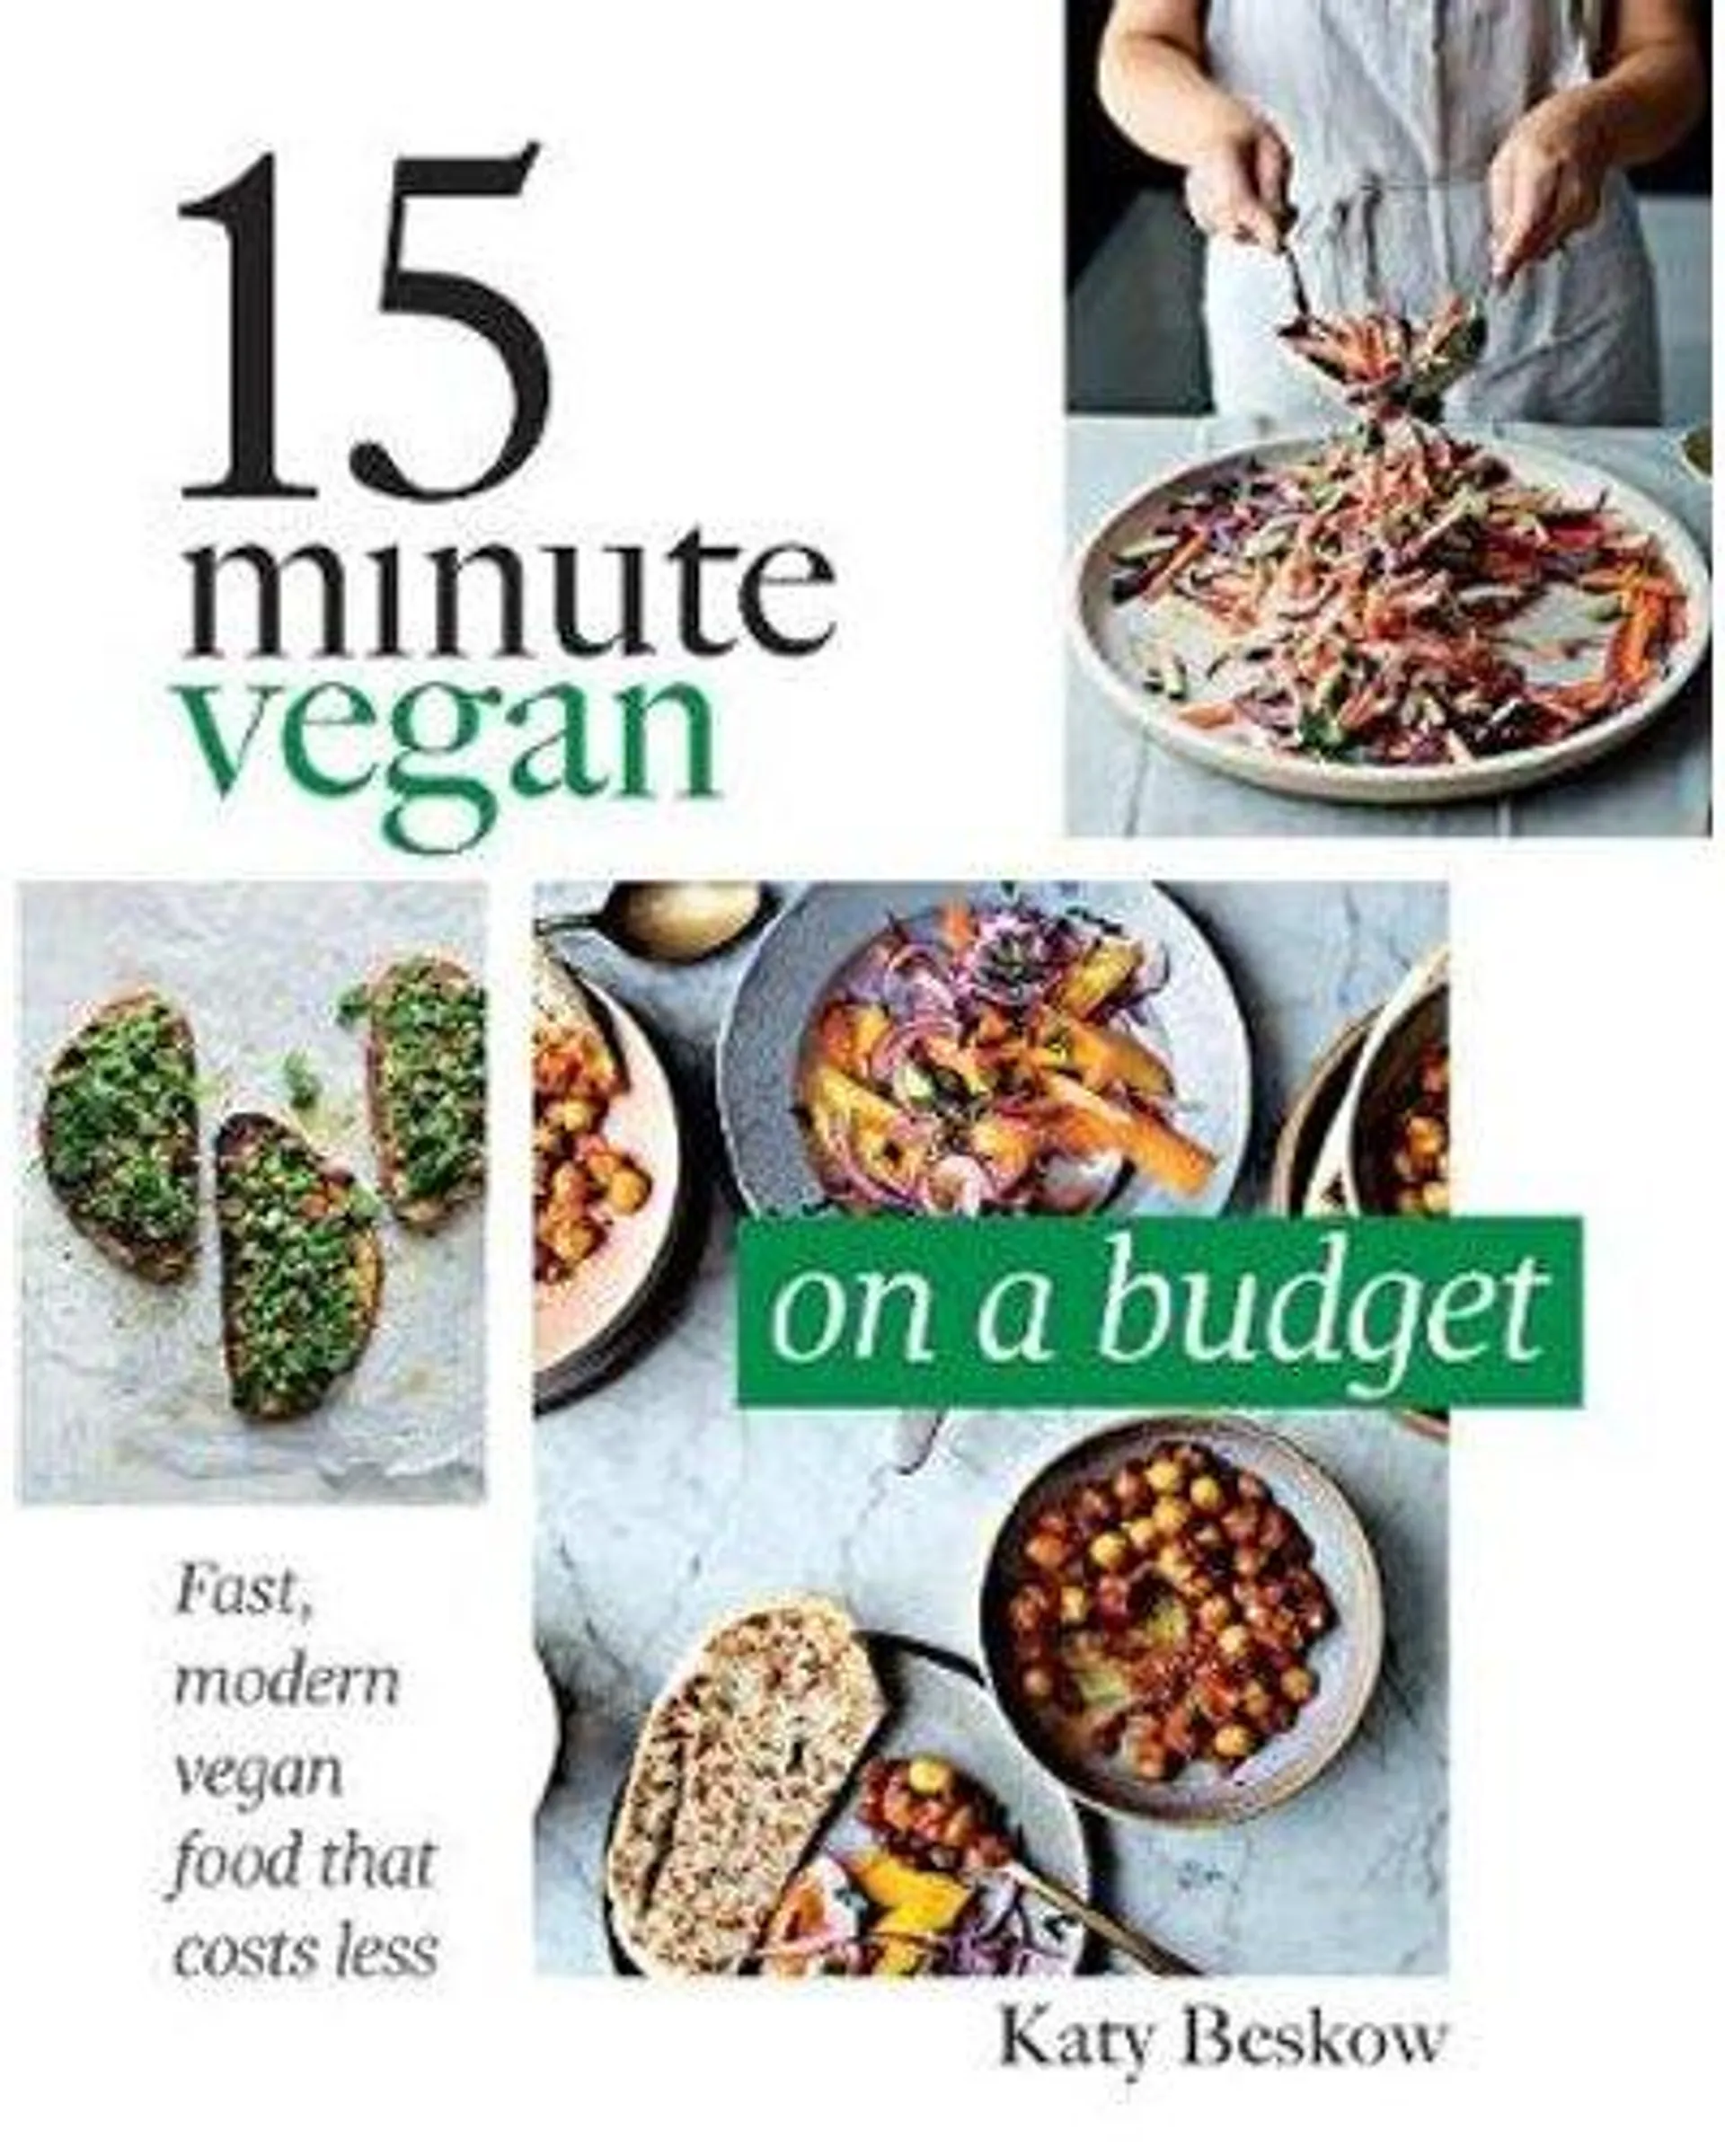 15 Minute Vegan: On a Budget - Fast, Modern Vegan Food that Costs Less (Hardcover)